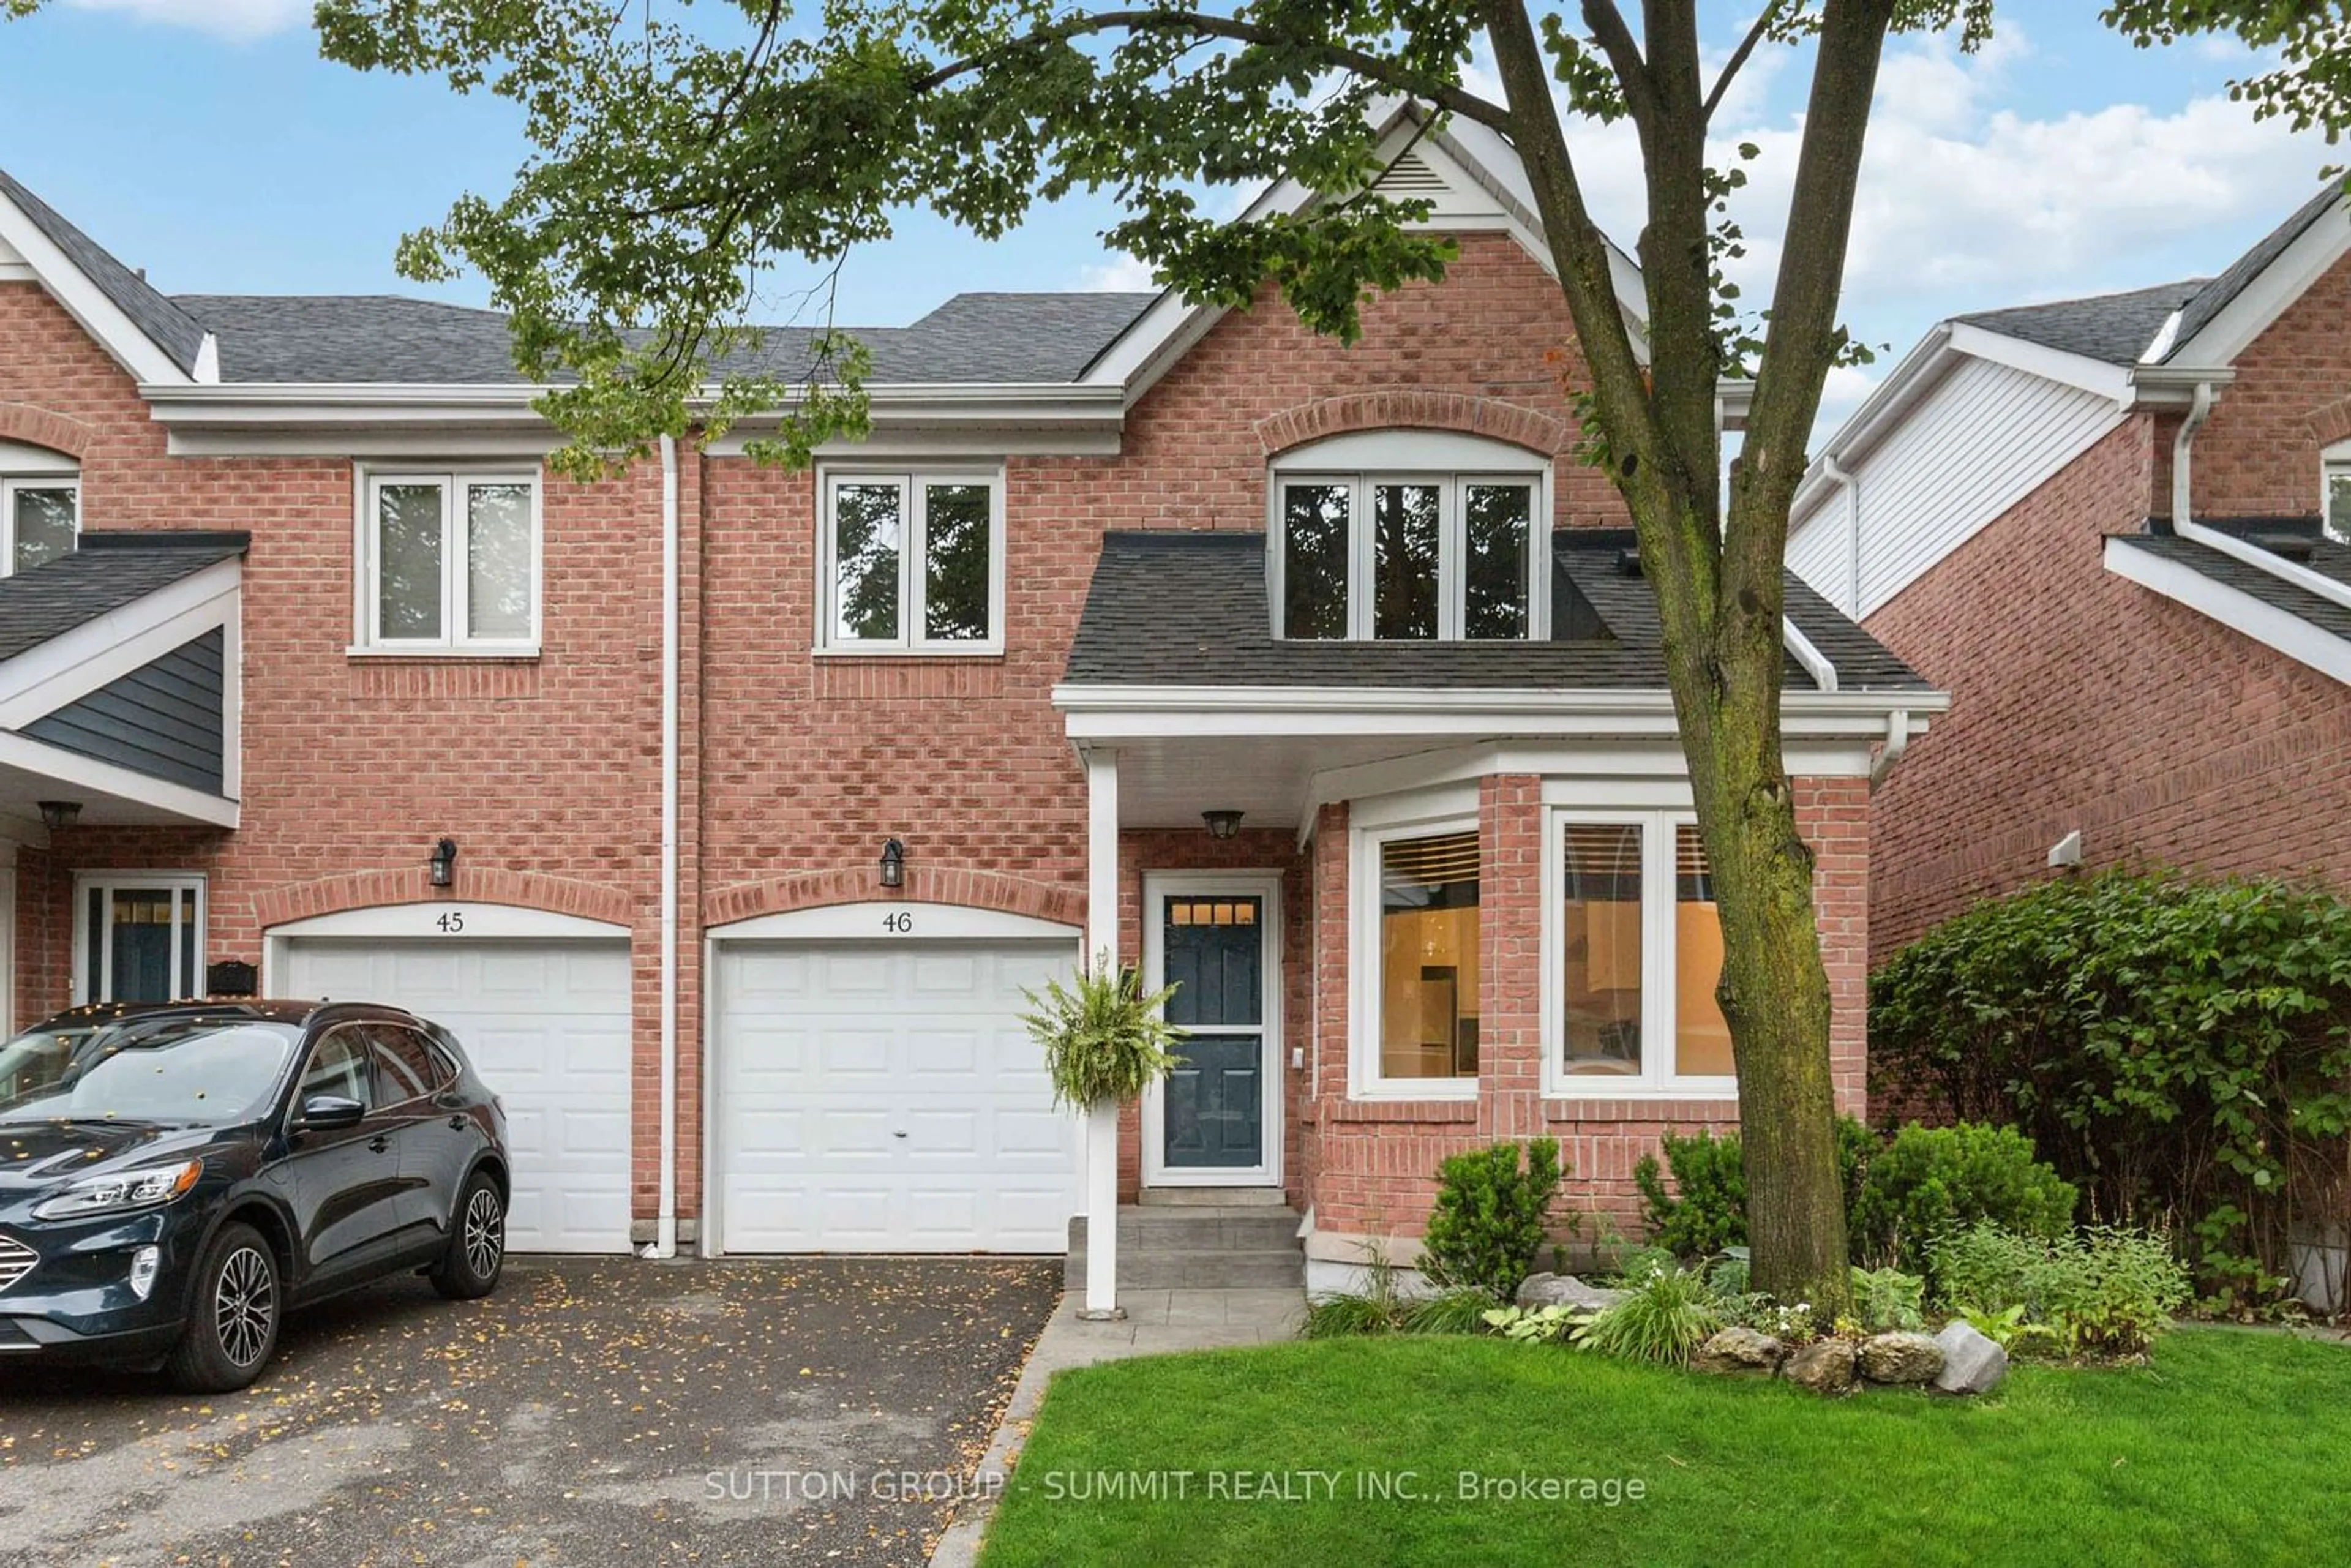 Home with brick exterior material for 2155 South Millway #46, Mississauga Ontario L5L 3S1